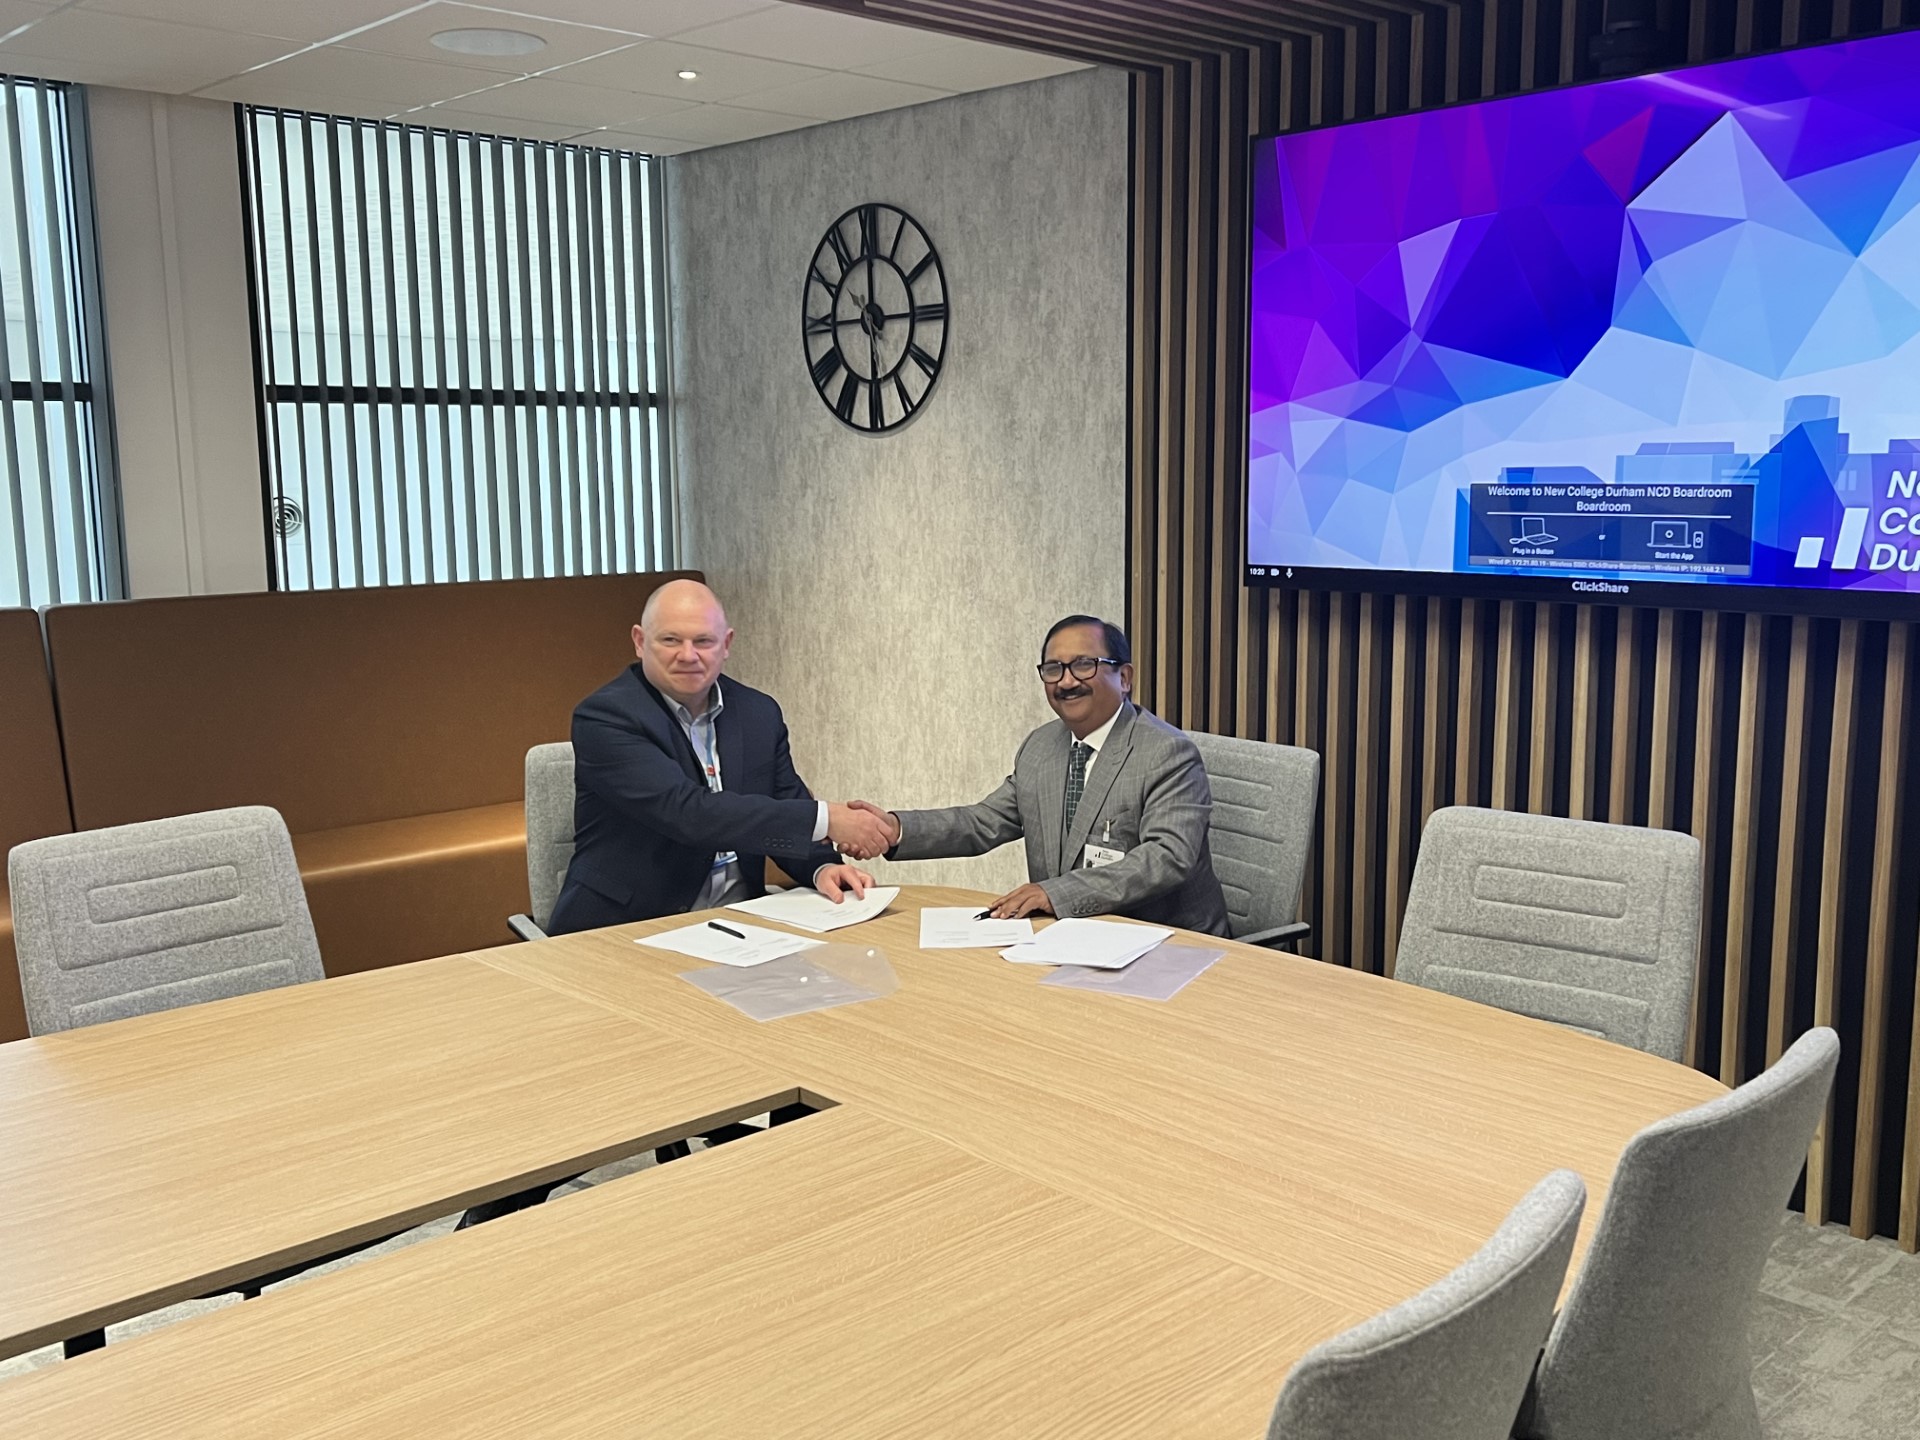 Andy Broadbent, Principal and CEO of Ƶ Durham, and Dr Padmesh Gupta, Managing Director of Oxford Business College, seal the new partnership